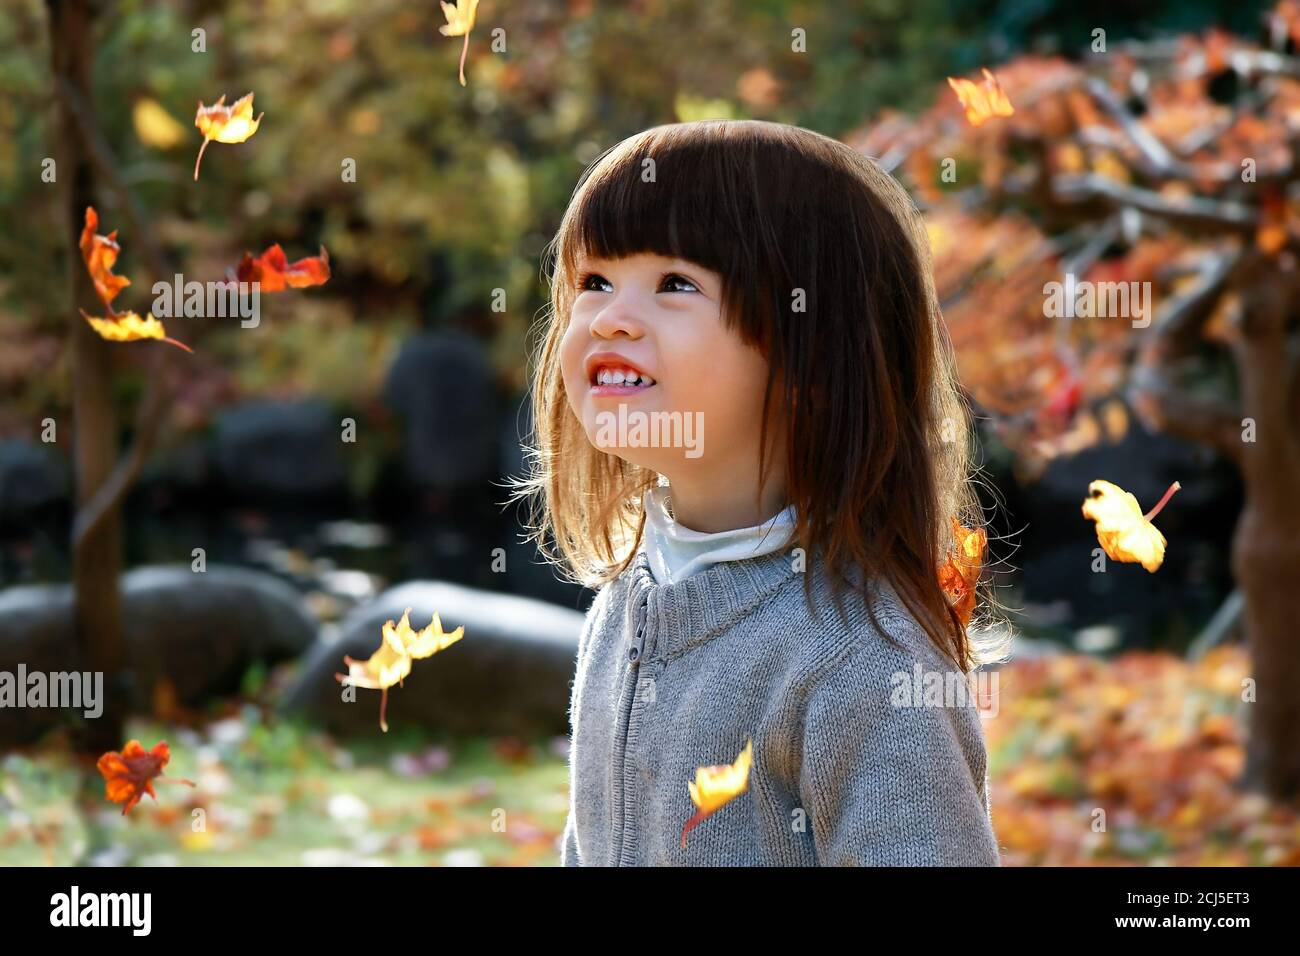 Cute little girl smiling and looking at falling leaves during fall season. Stock Photo